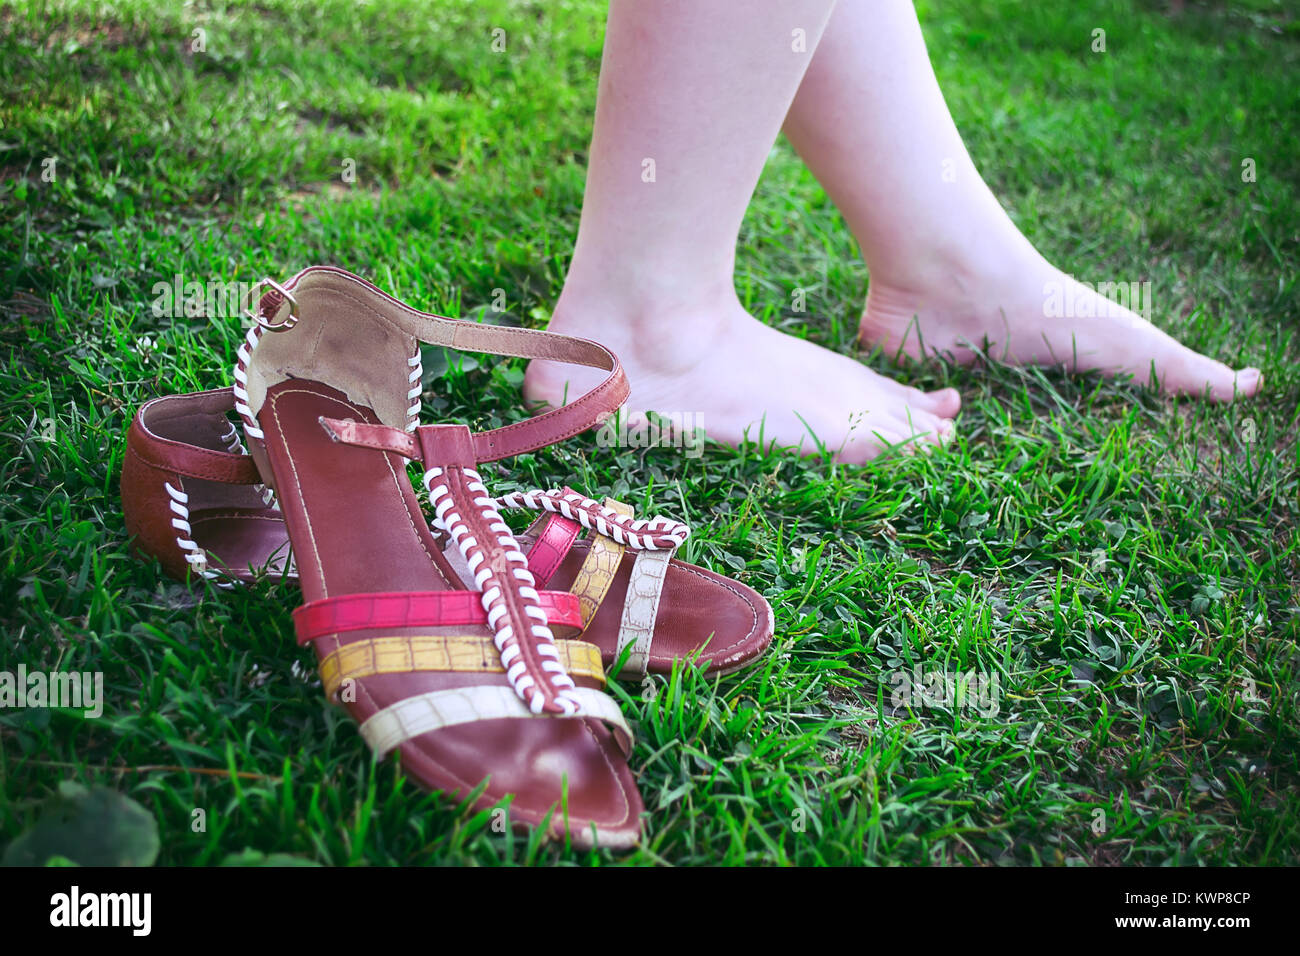 Persons Legs Jeans Grey Trainer Shoes Laying Grass Bright Green Stock Photo  by ©Michelle_Silke 361764408